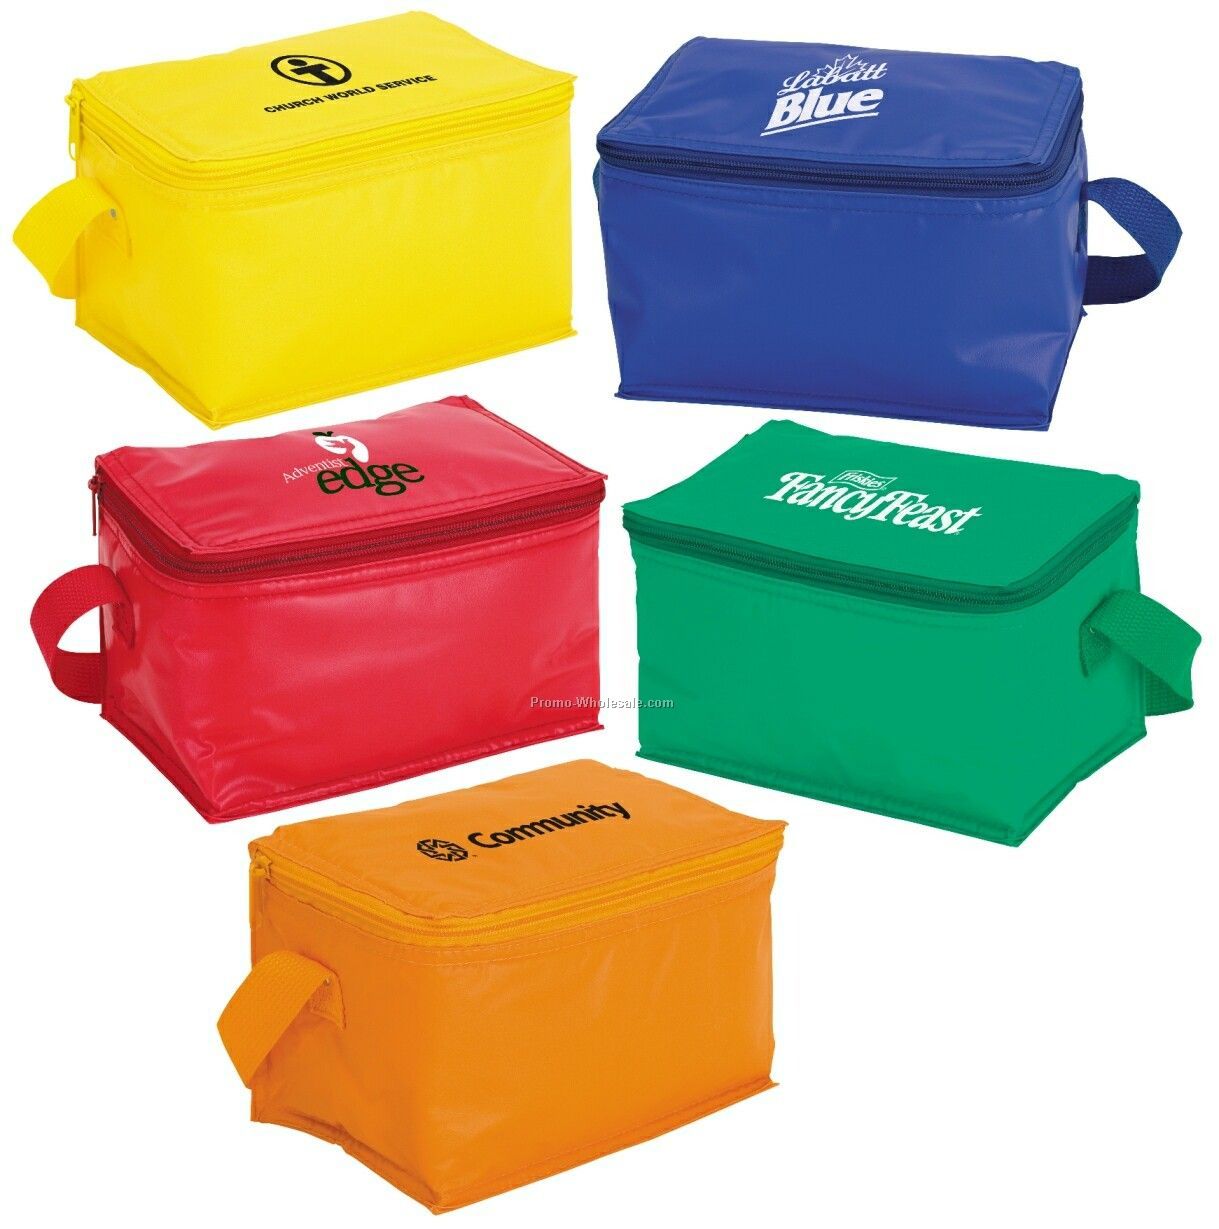 Giftcor Green Econo 6-can Cooler 5"x8"x5"